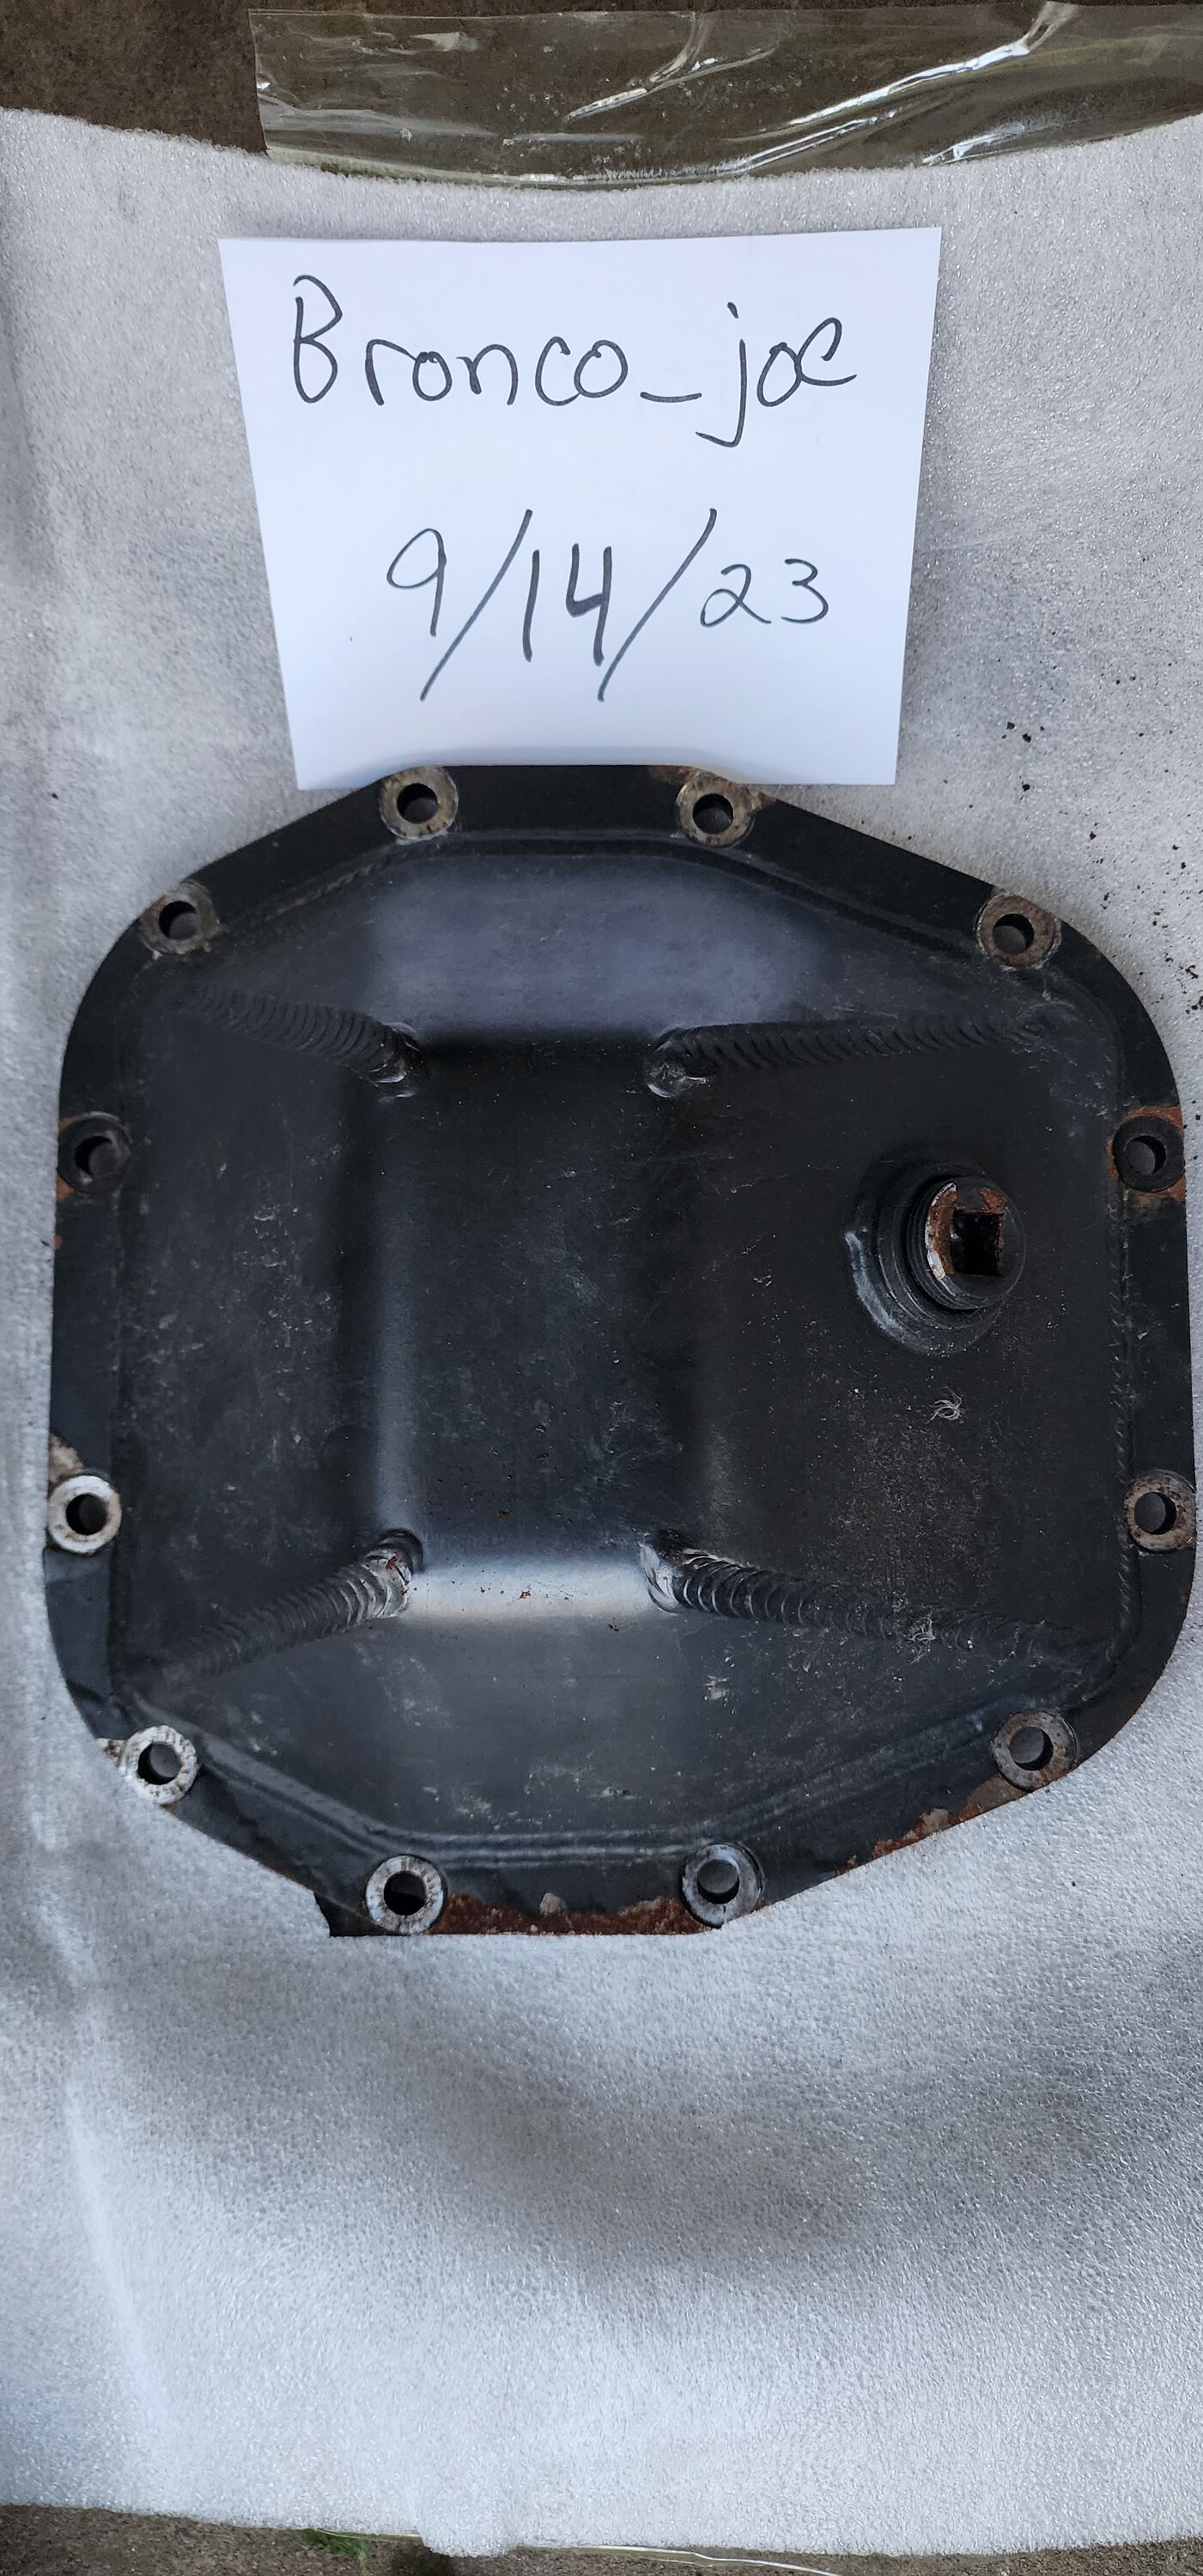 Ford Bronco Diff cover $85 20230914_183030